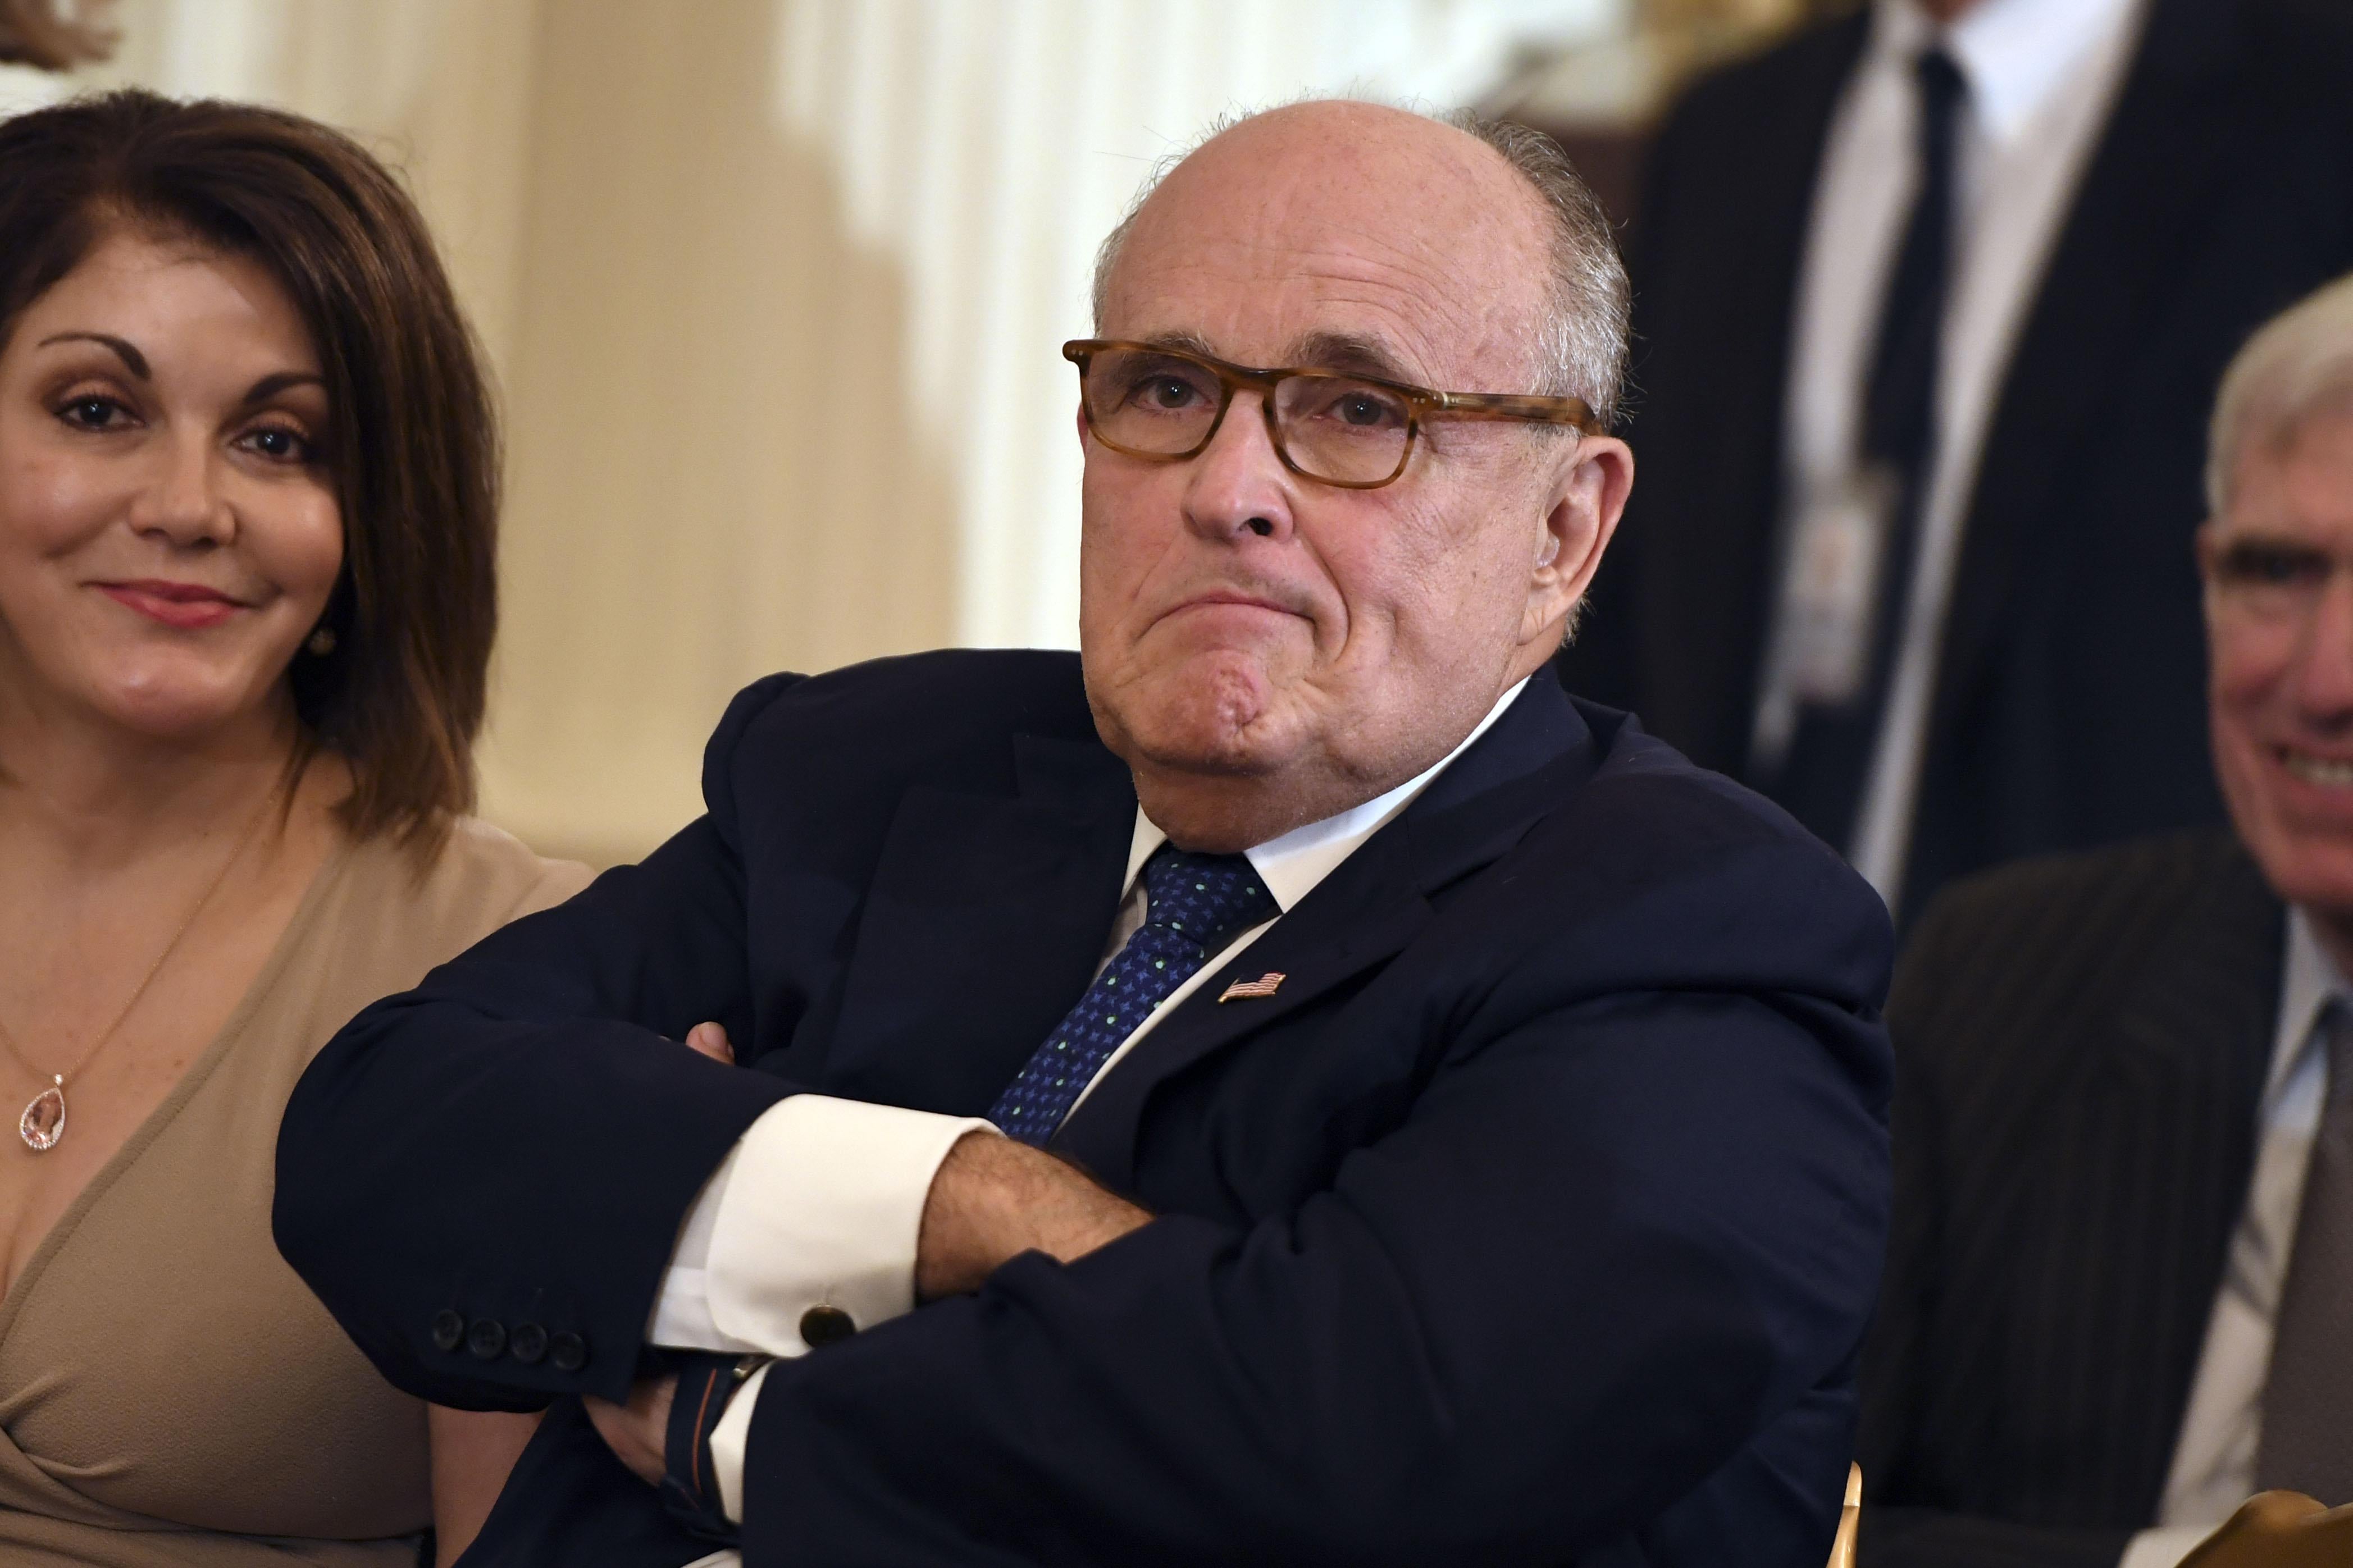 Rudolph Giuliani looks on before President Donald Trump announces his Supreme Court nominee in the East Room of the White House on July 9, 2018 in Washington, D.C.